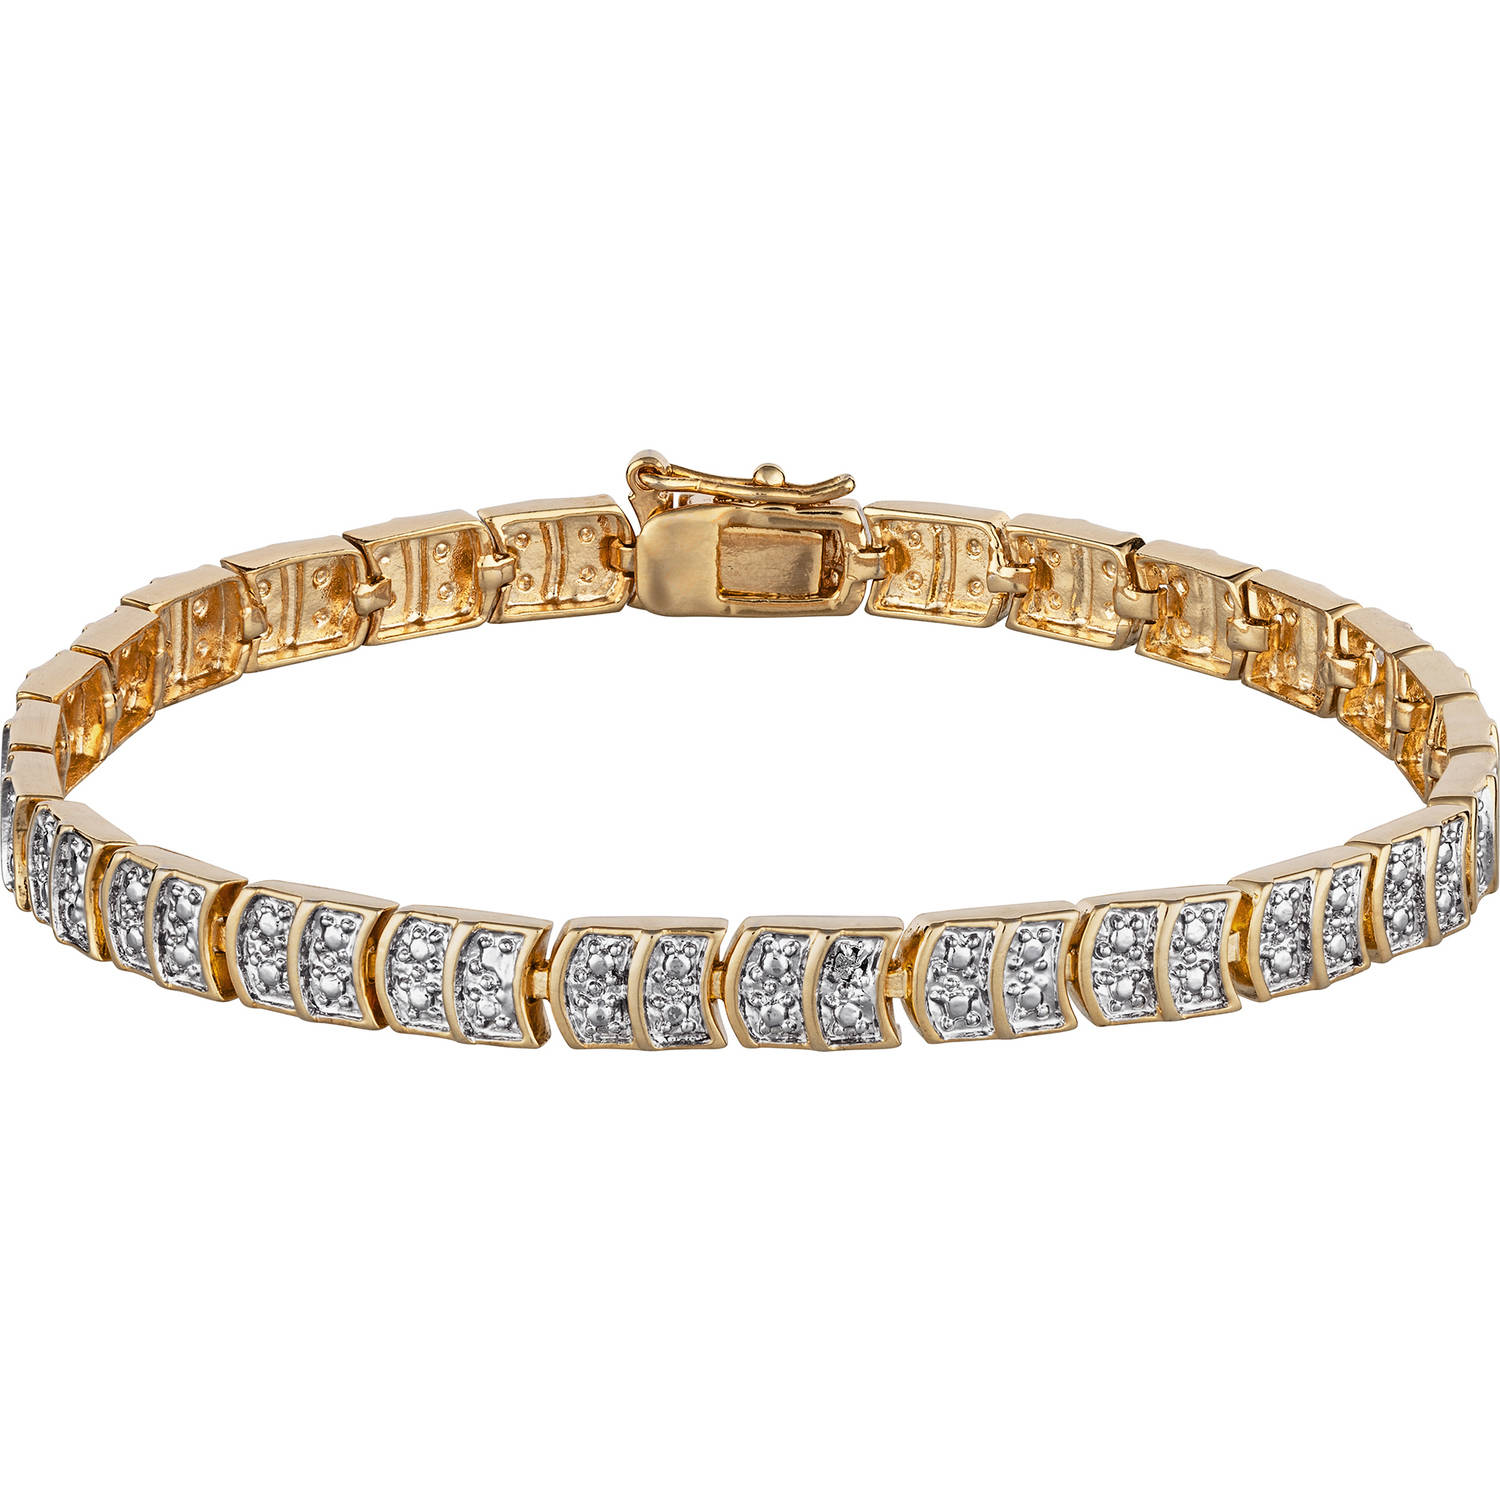 Diamond Accent 14kt Gold-Plated Tennis Bracelet, 8" - image 1 of 2